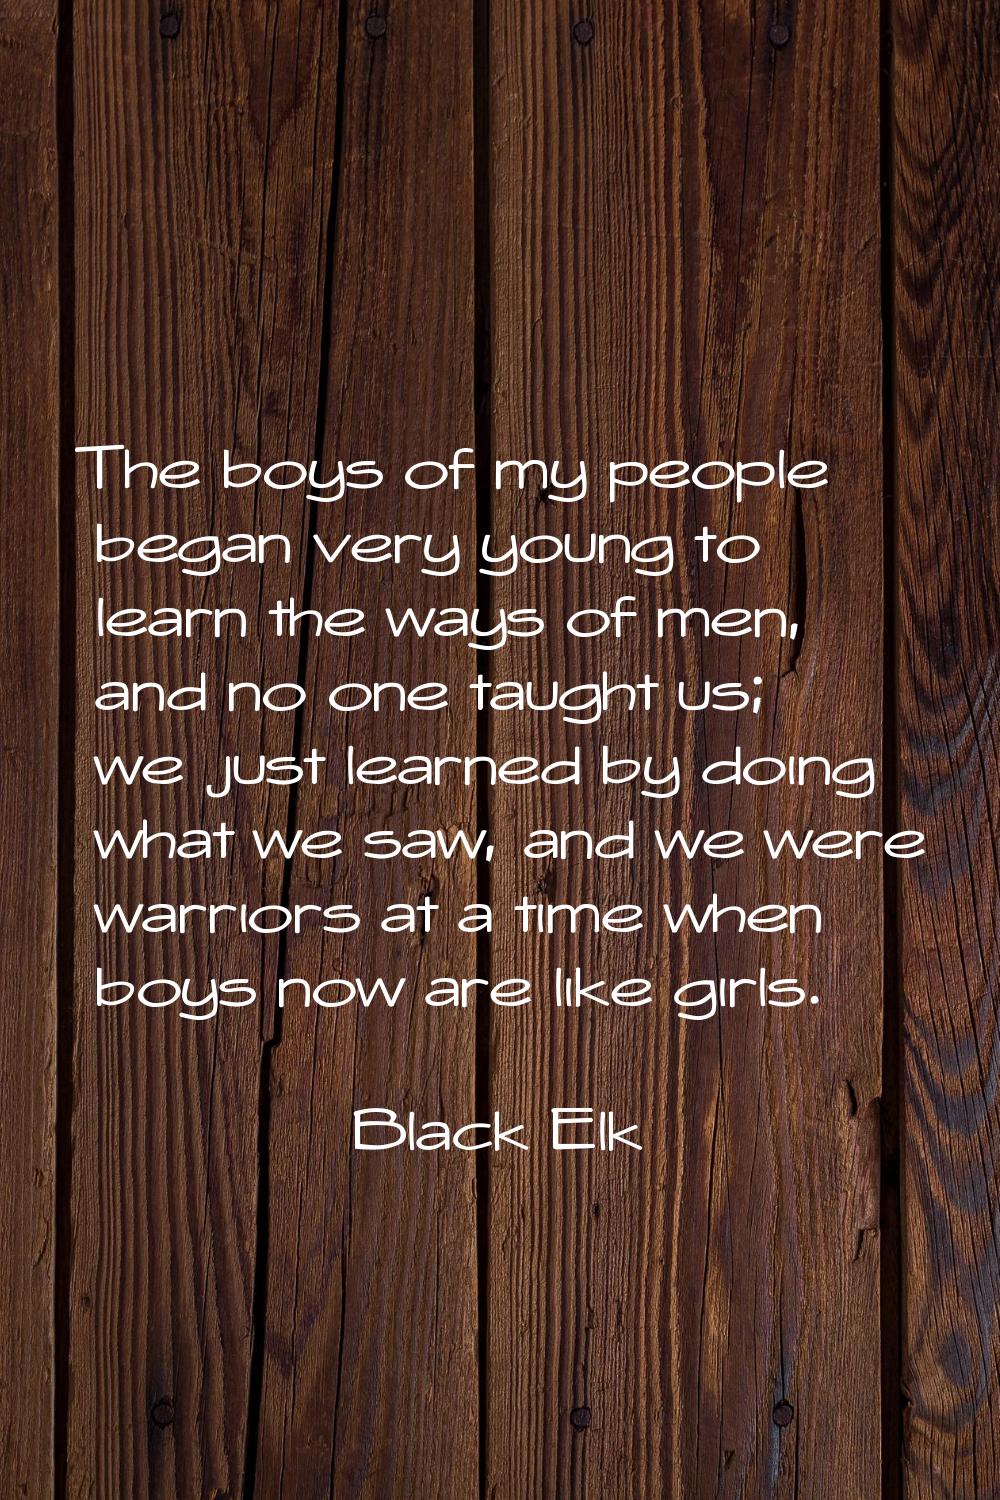 The boys of my people began very young to learn the ways of men, and no one taught us; we just lear